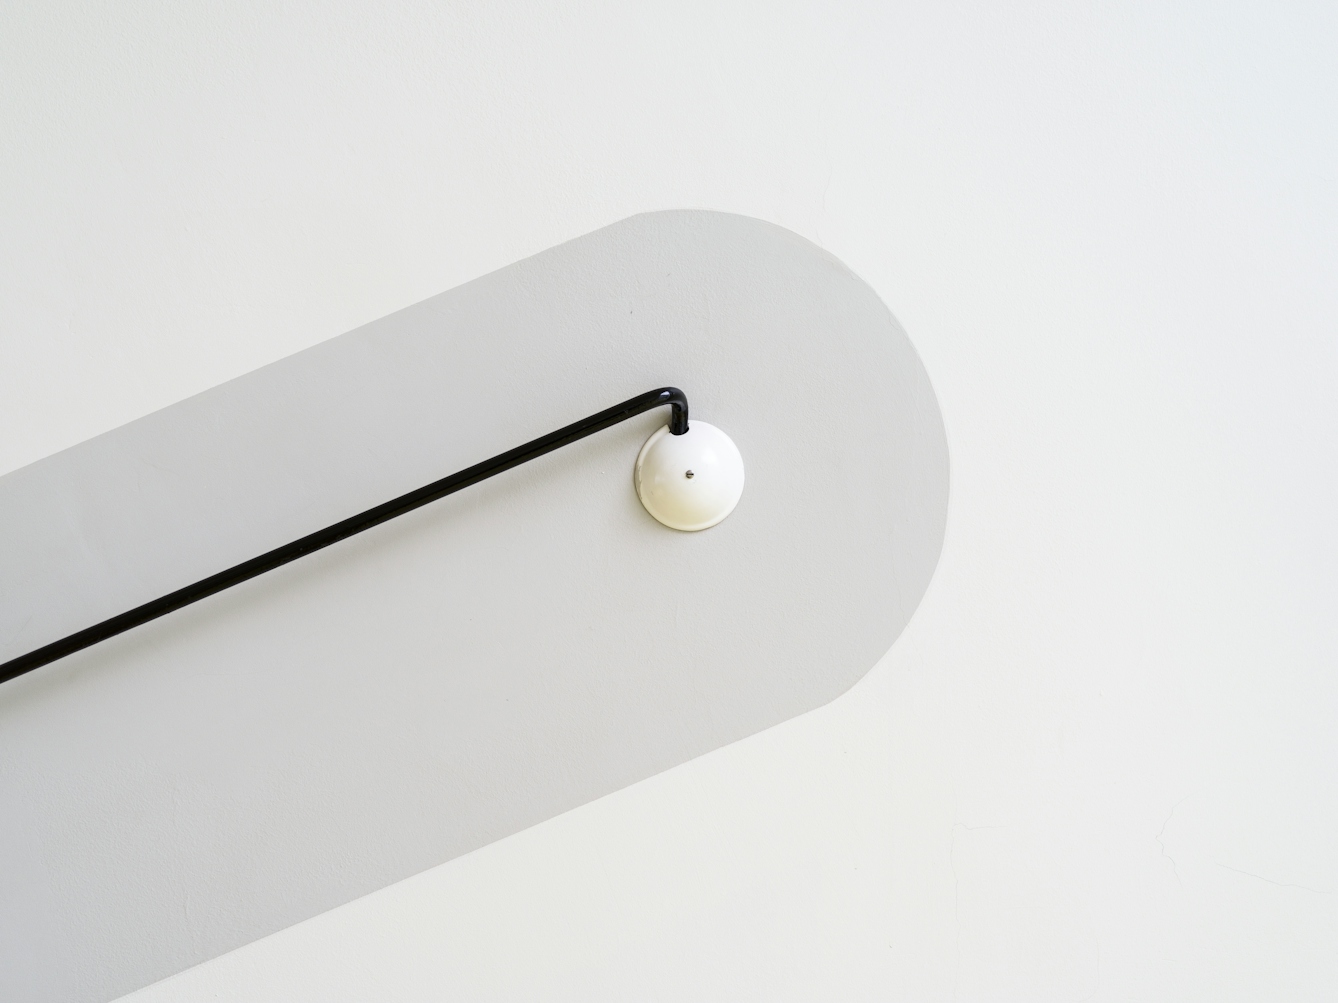 Photograph of an architectural detail inside the Paimio Sanatorium, designed and built by the architect Alvar Aalto.